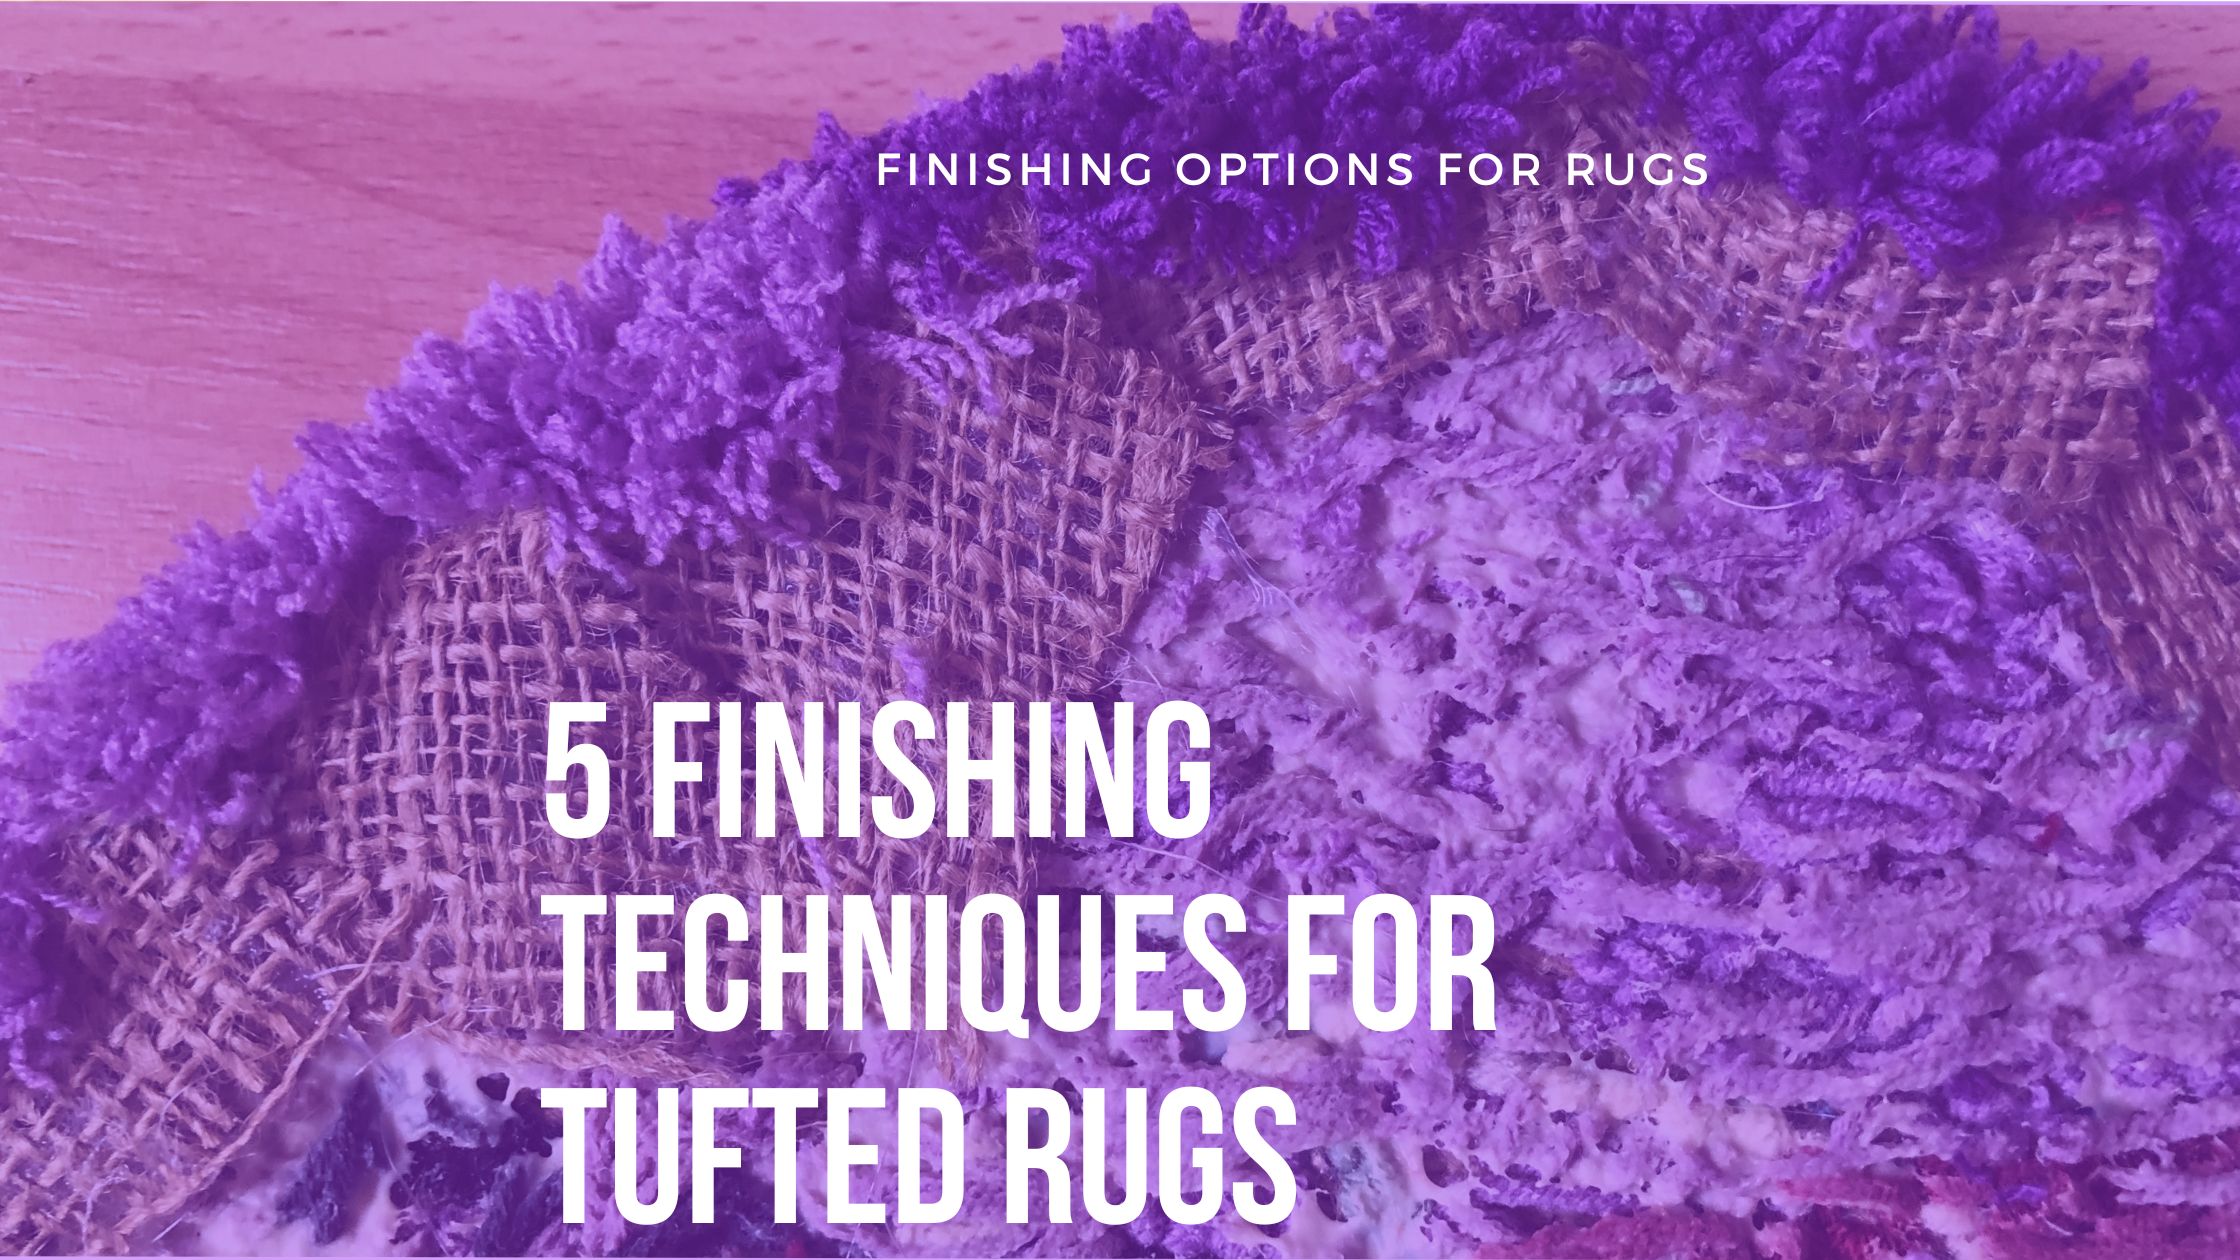 5 Finishing Techniques For Tufted Rugs